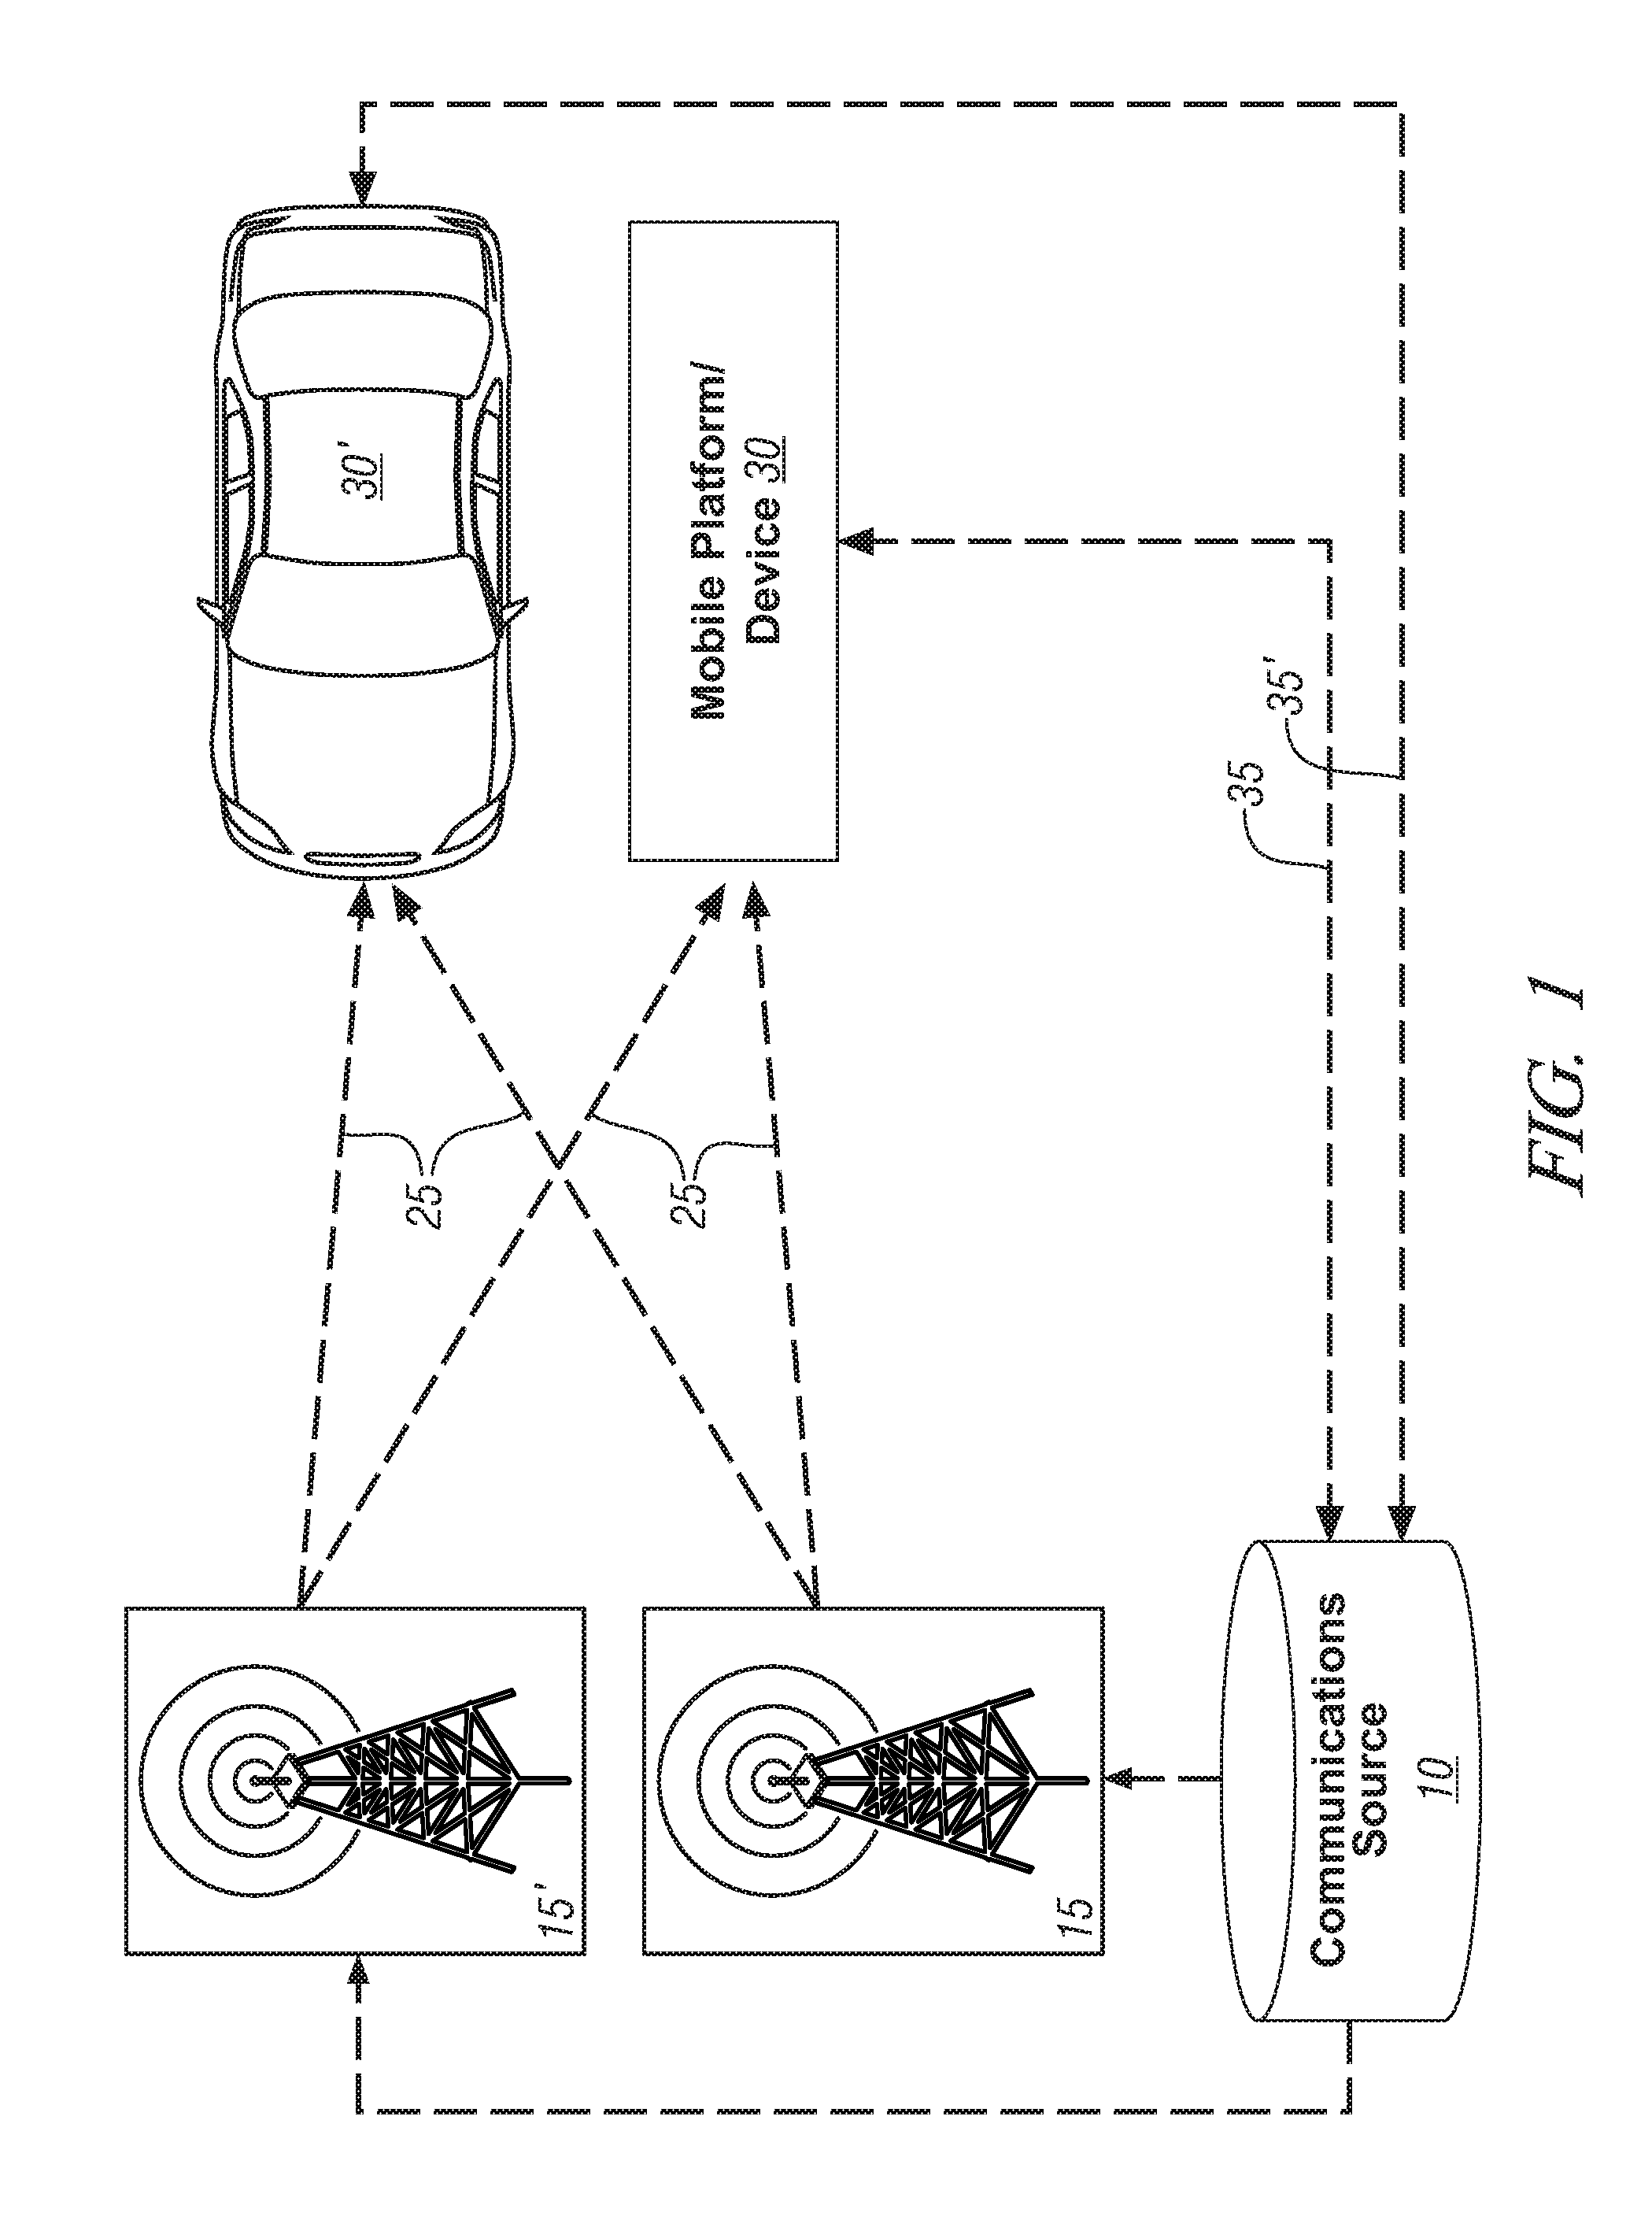 Method and system for communicating information to a user of a mobile platform via broadcast services